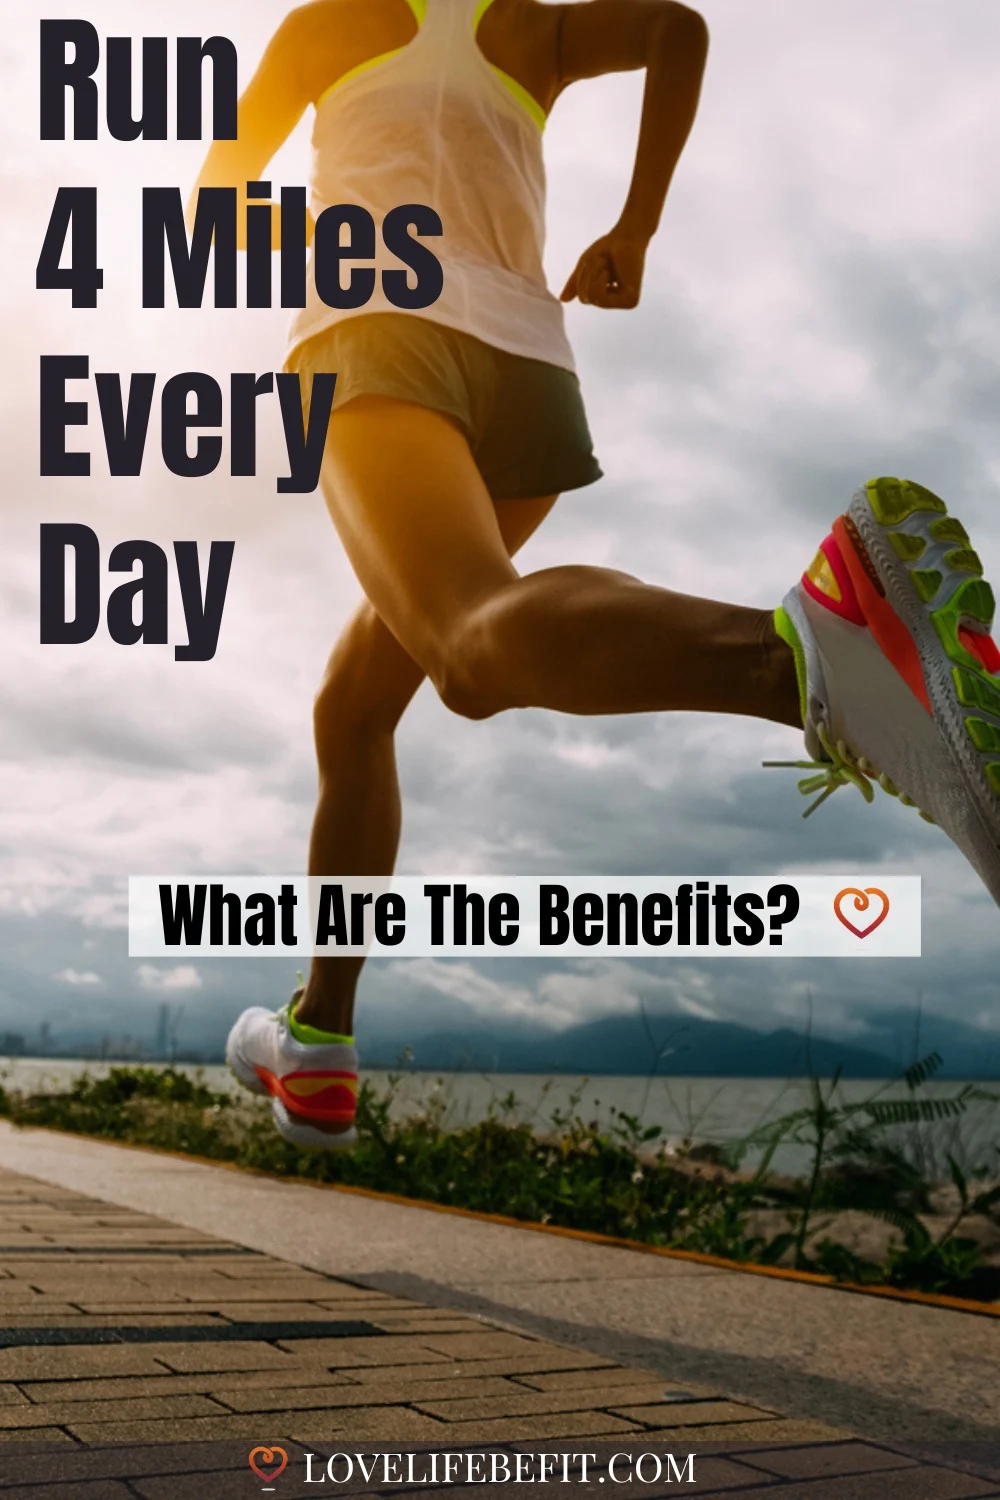 Benefits of running every day